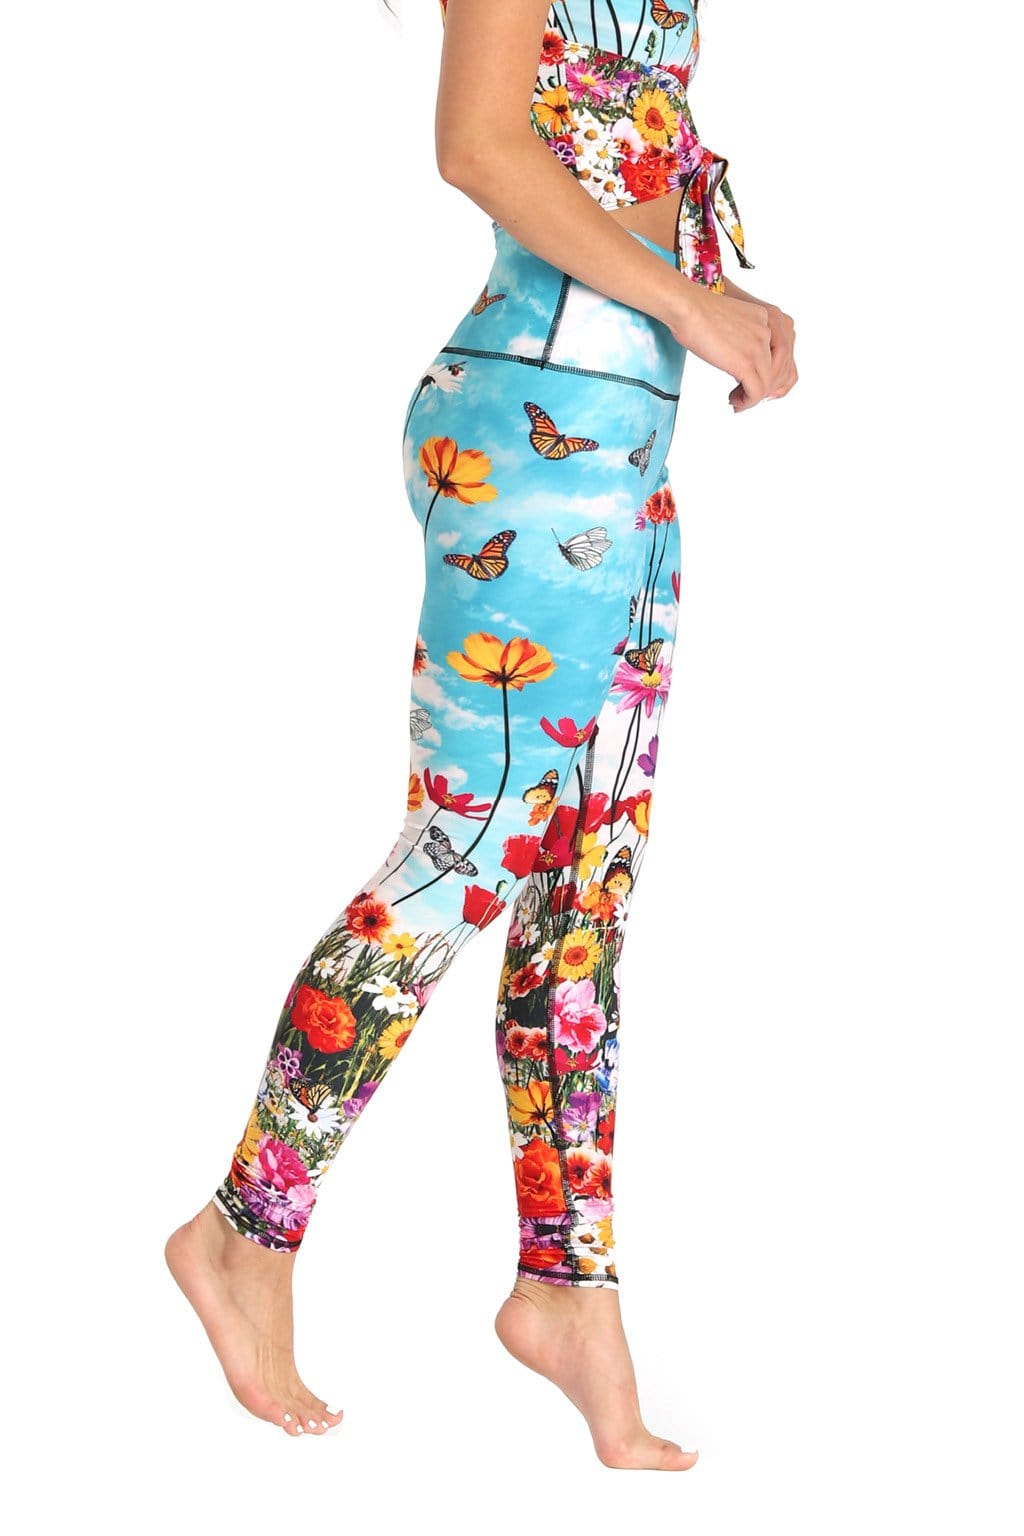 Womens High Waist Yoga Leggings with Pockets Colorful Flower Butterfly  Print Leggings Stretch Fabric Pants